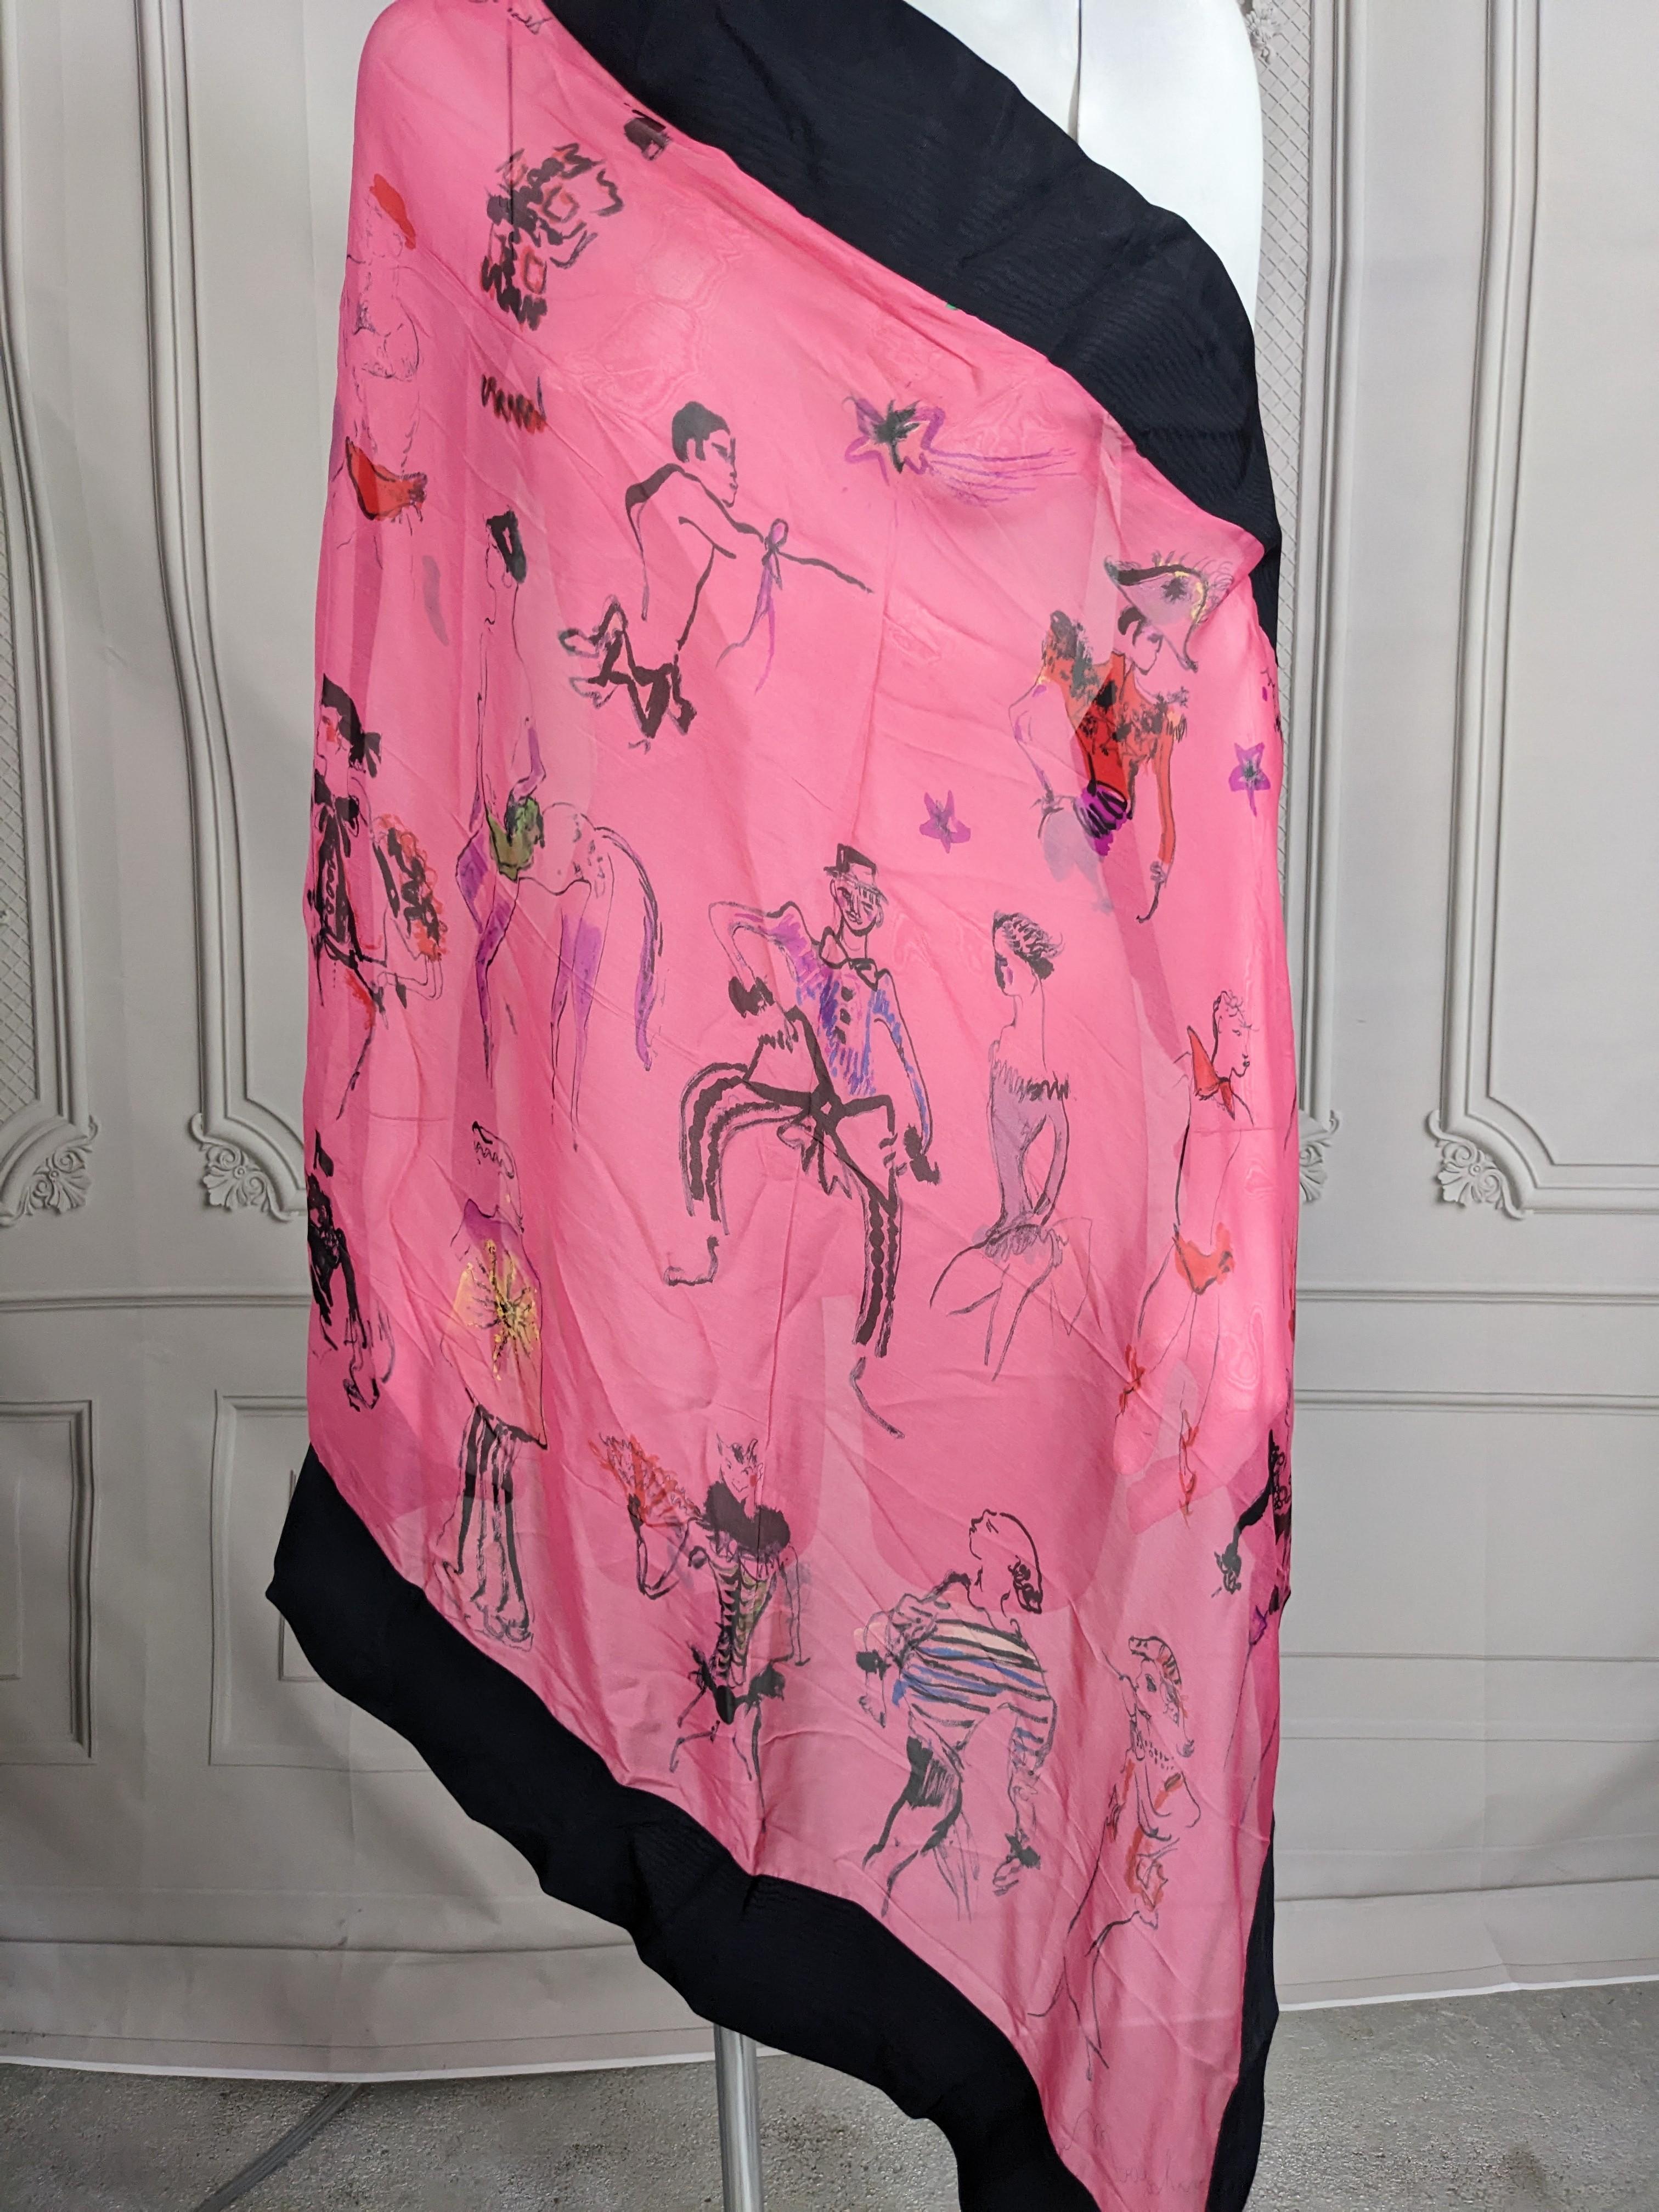 Amazing Moschino Silk Chiffon Painted Scarf with Vertes type sketches printed throughout of 1930's French cafe society as well as the famed Schiaparelli Globius Cape. Printed on silk chiffon with a stiffer black faille border. The border reverses to